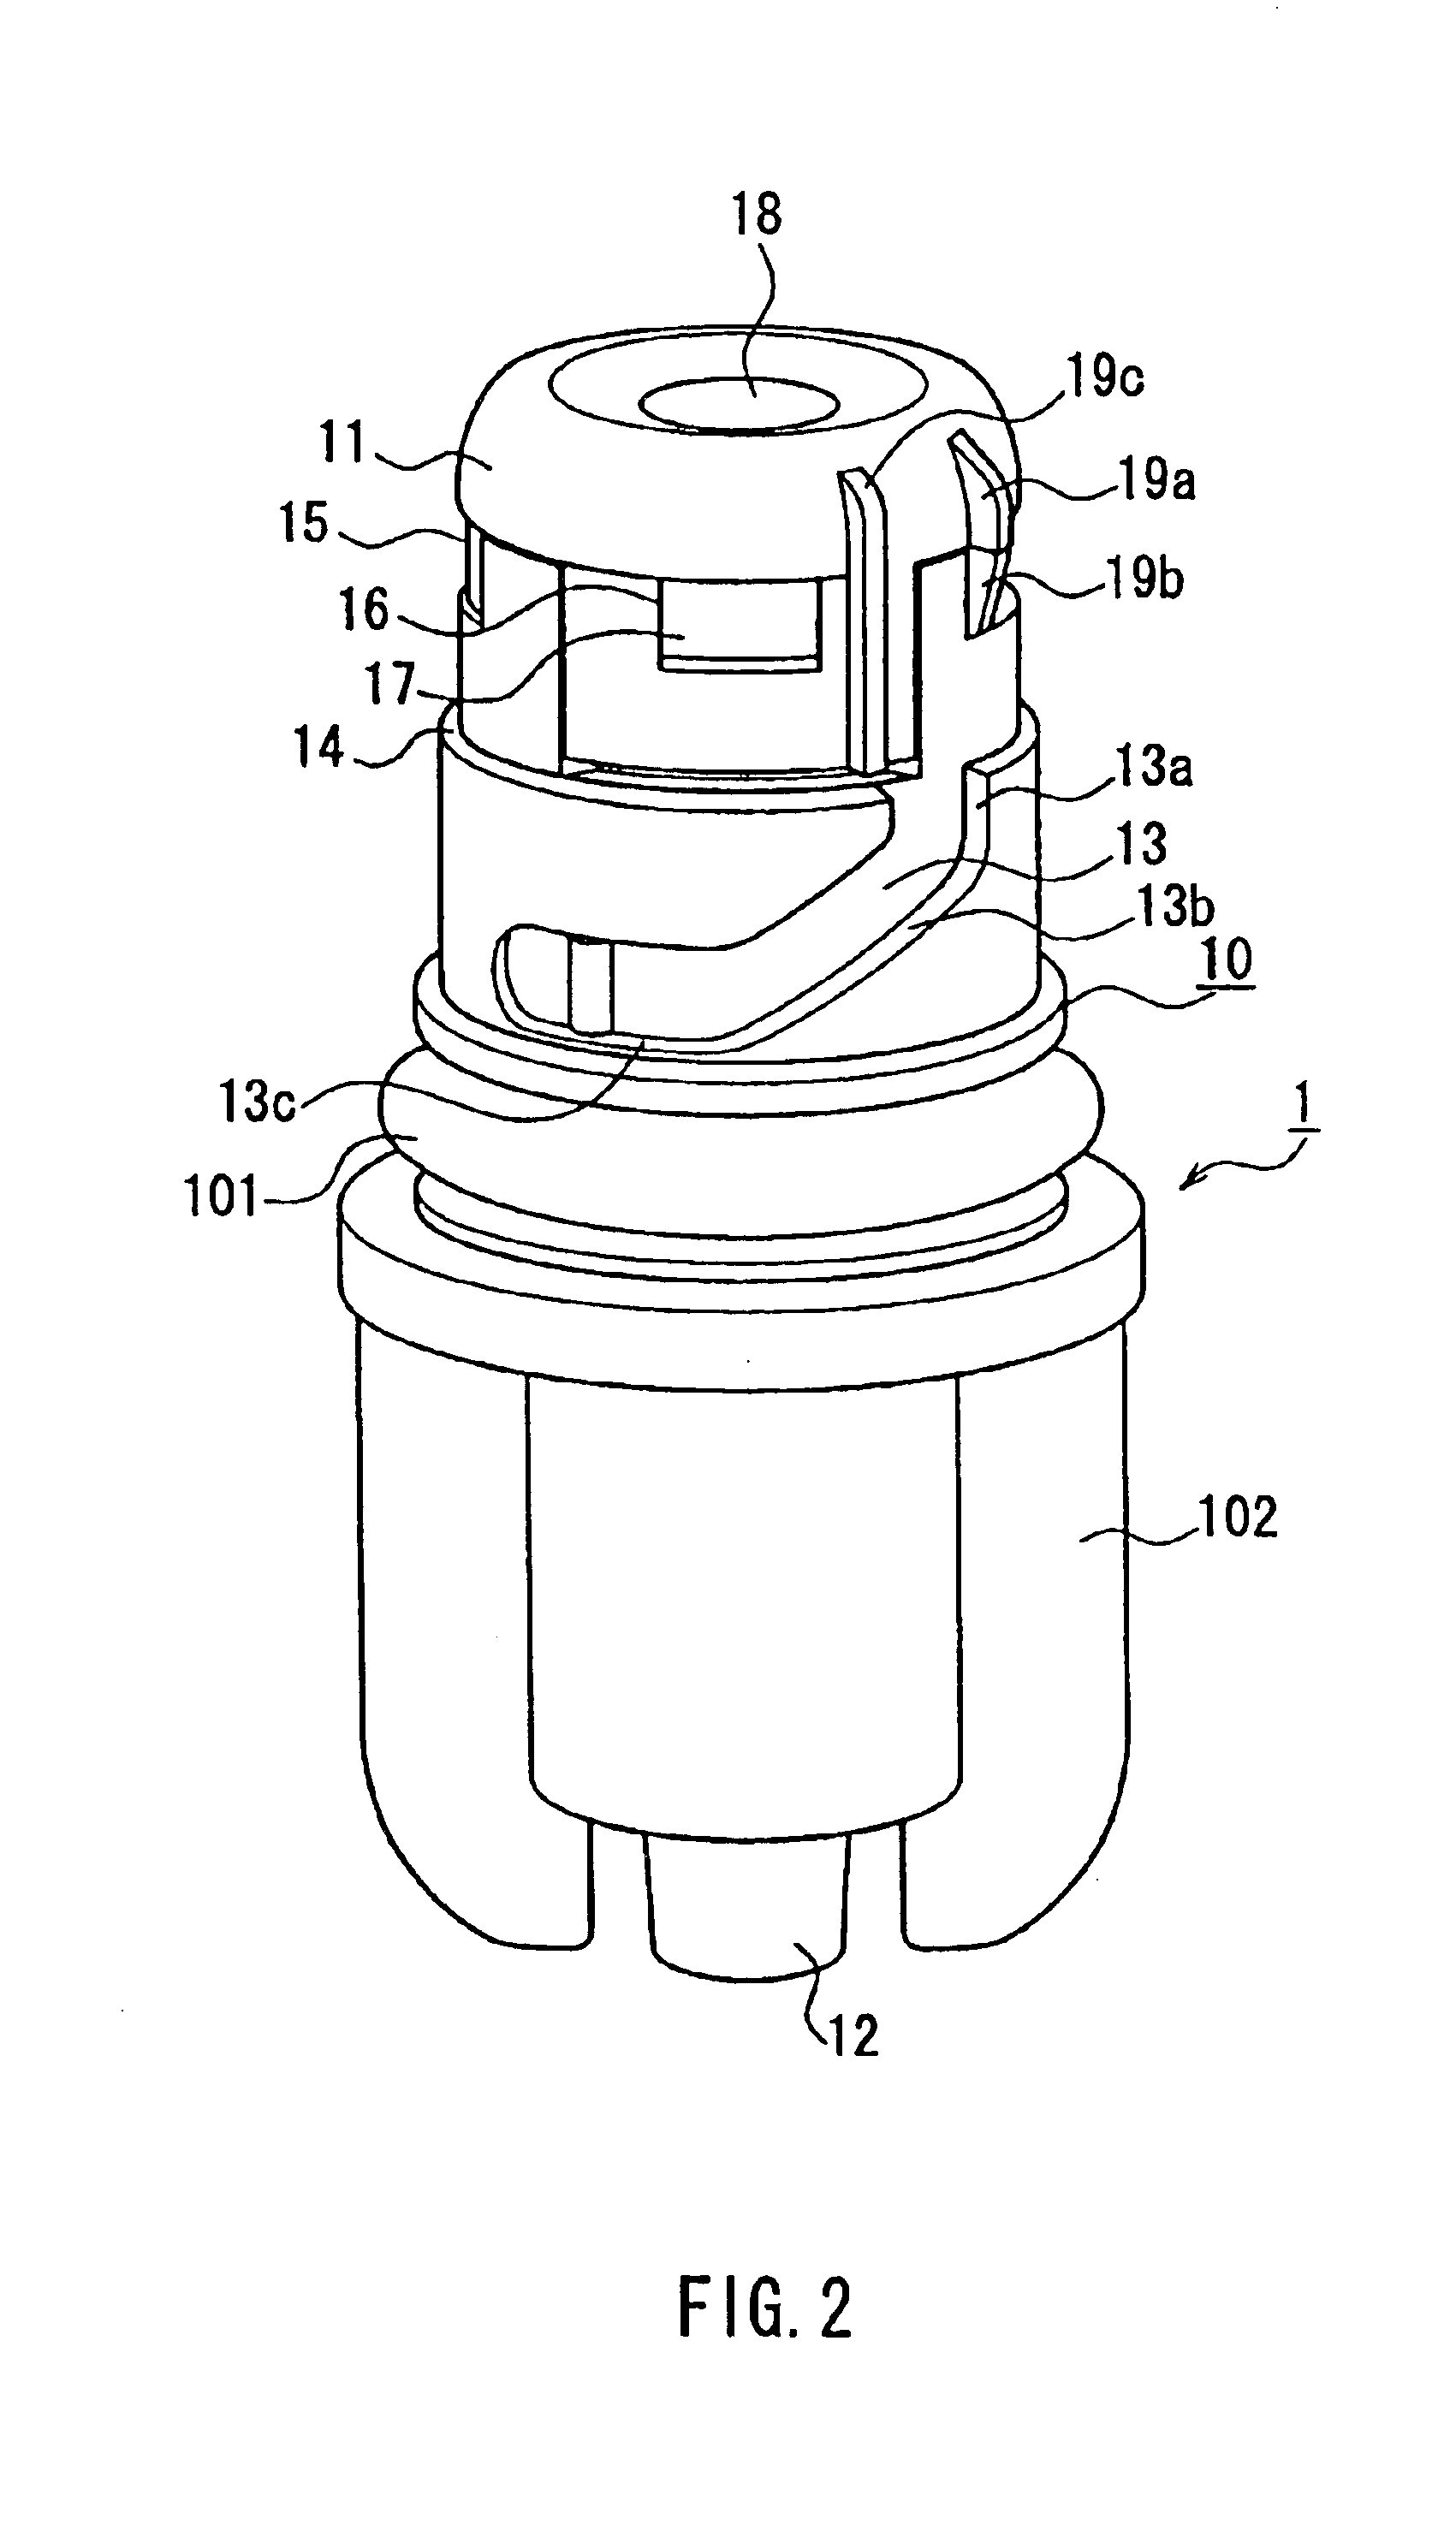 Connector system for sterile connection